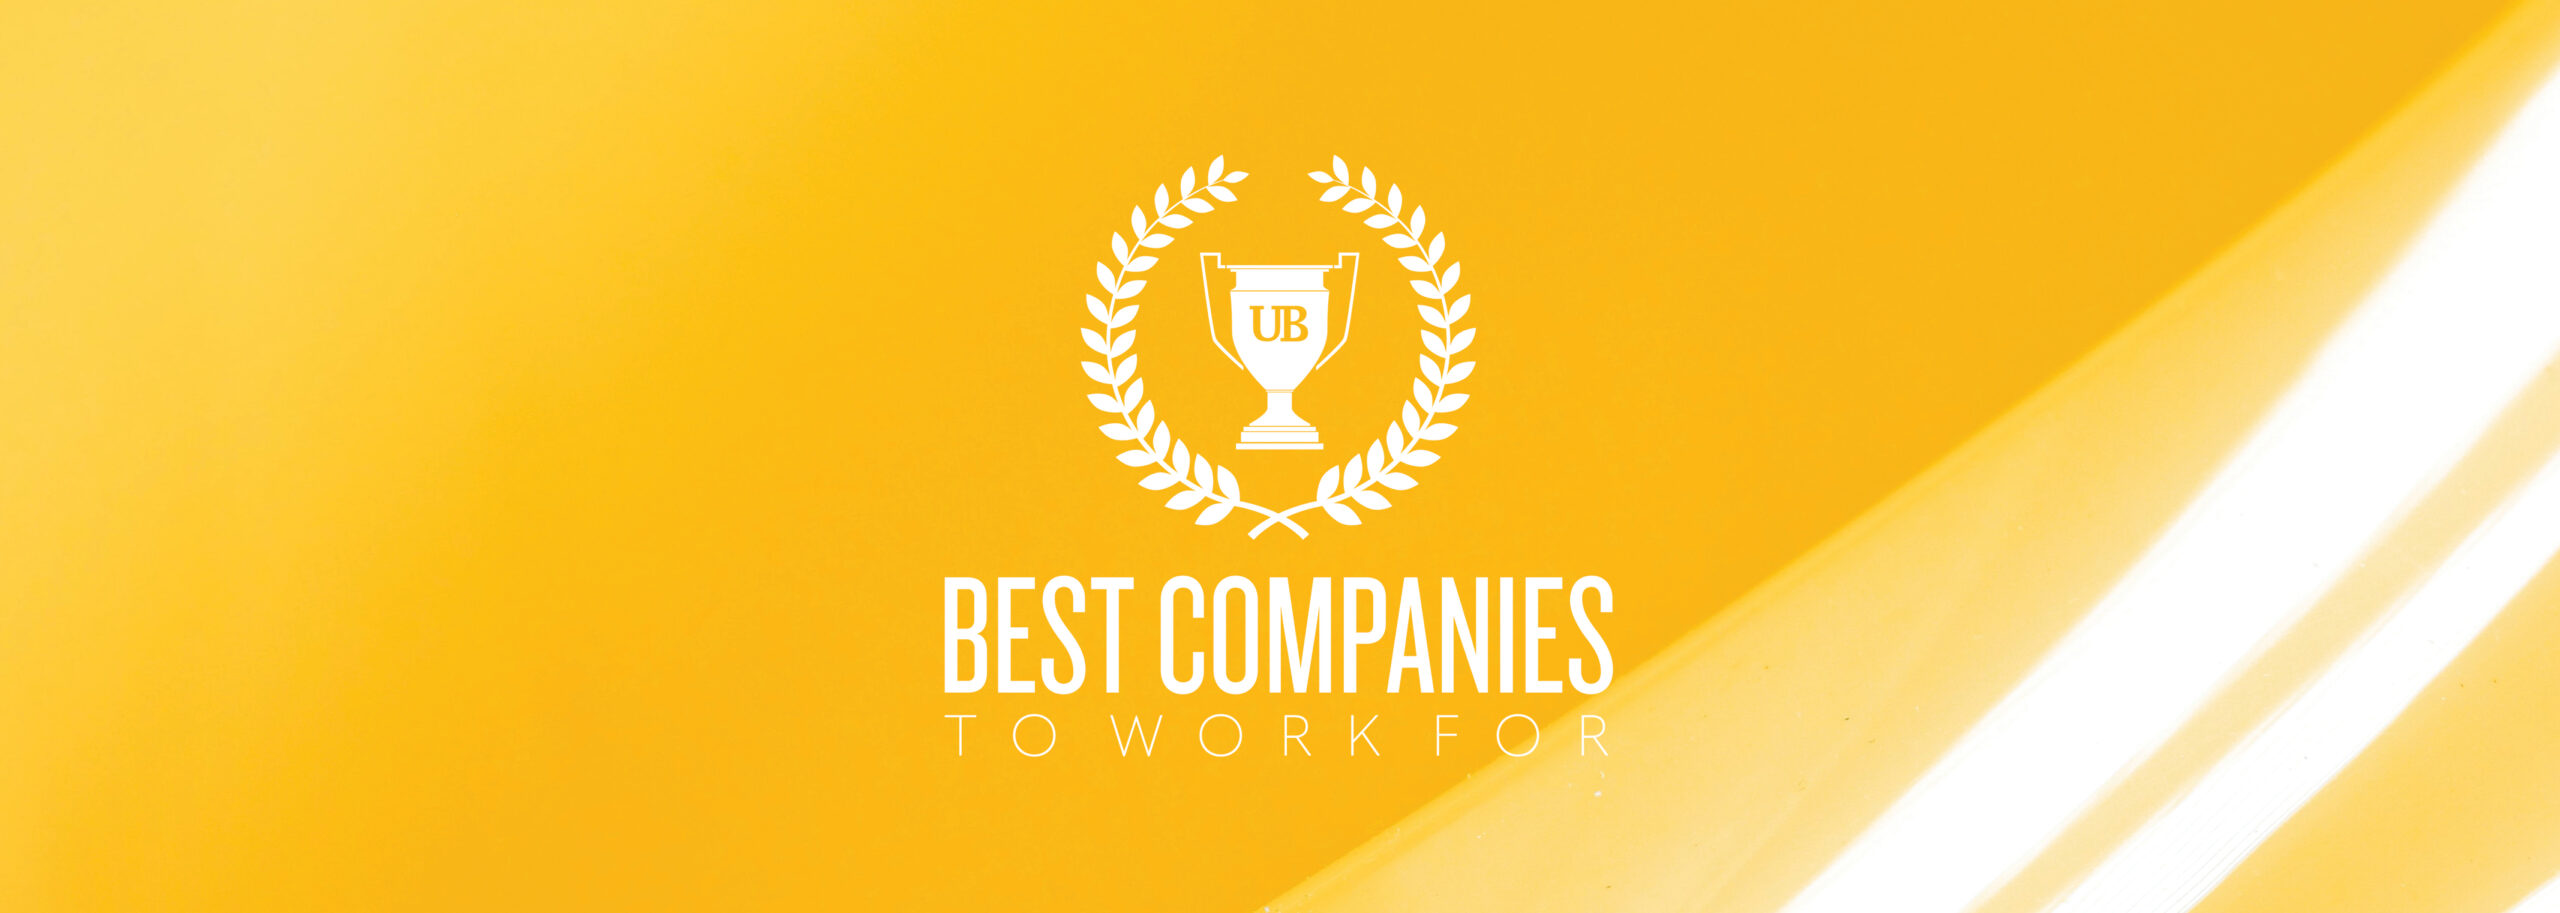 These are the places that you should be sending your resume-the 2022 best companies to work for in Utah list is here.